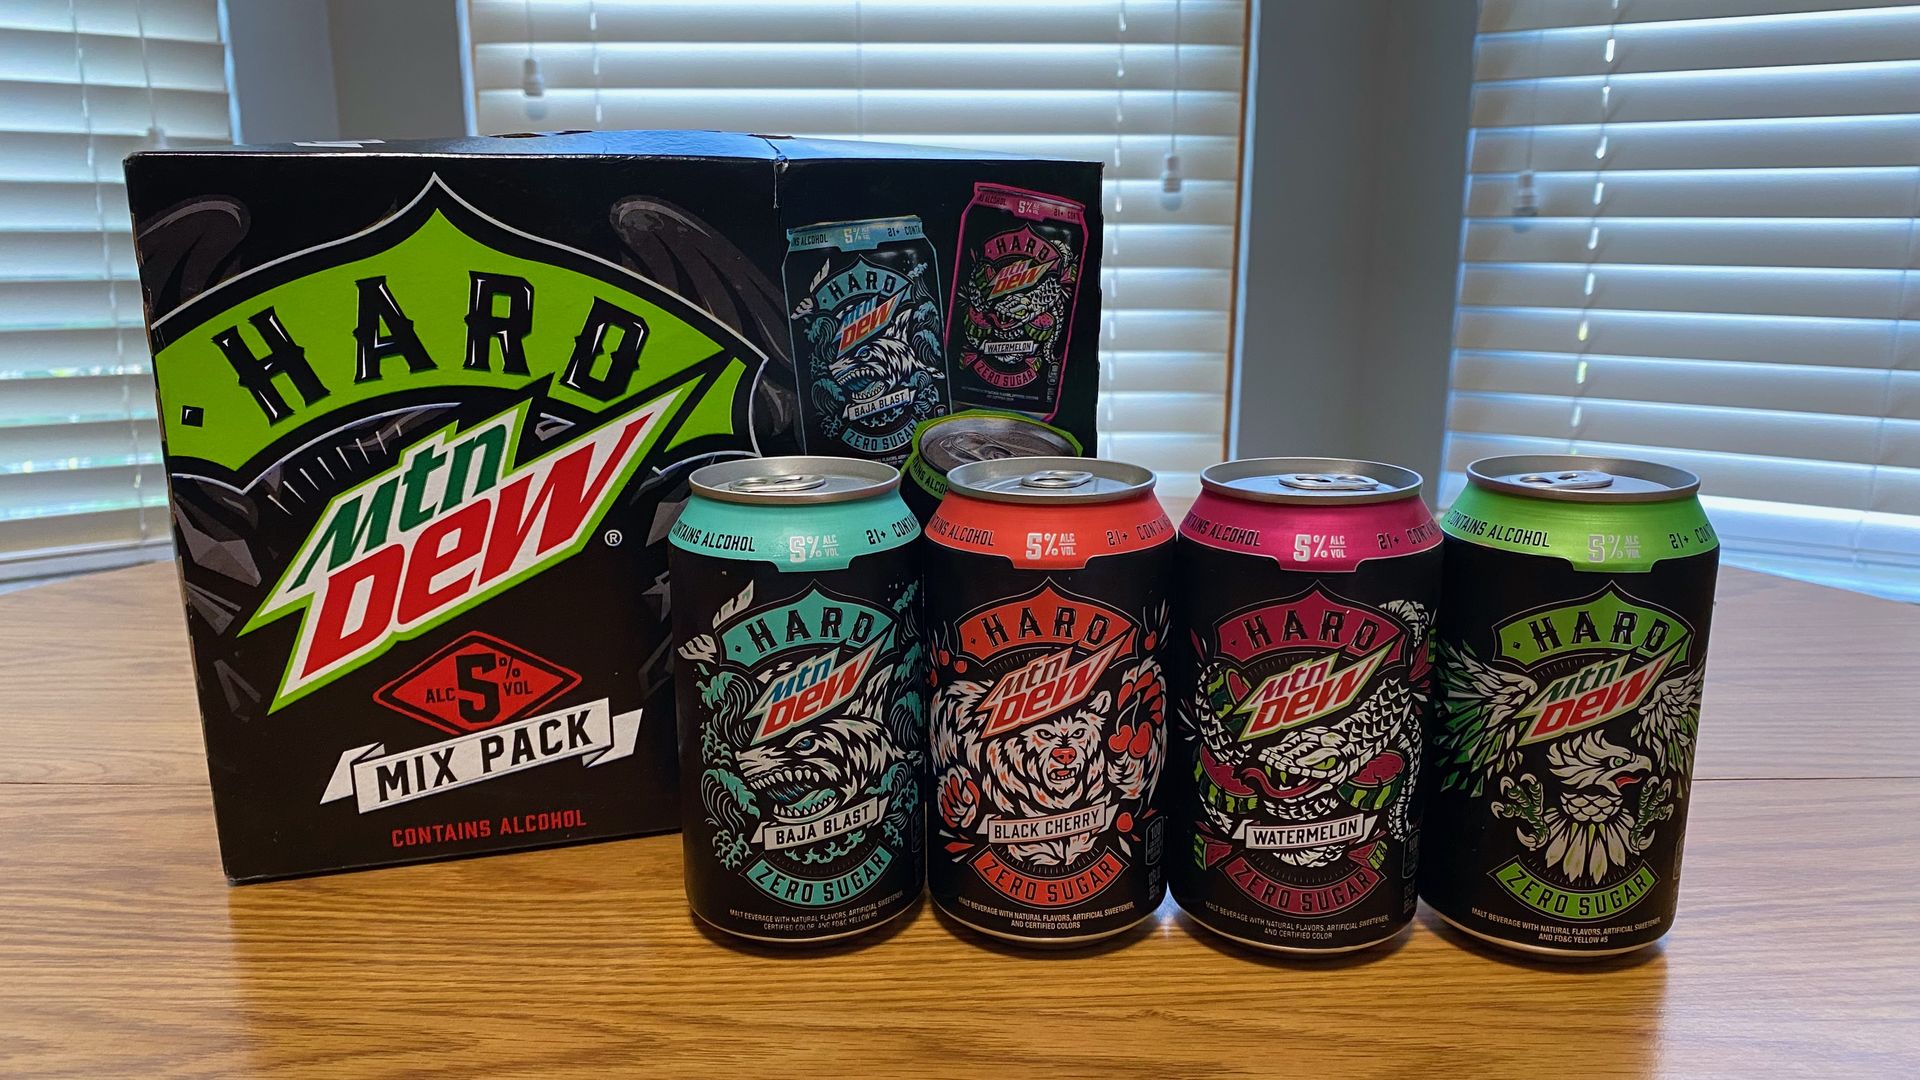 Our review of Hard Mountain Dew: a polarizing new boozy beverage